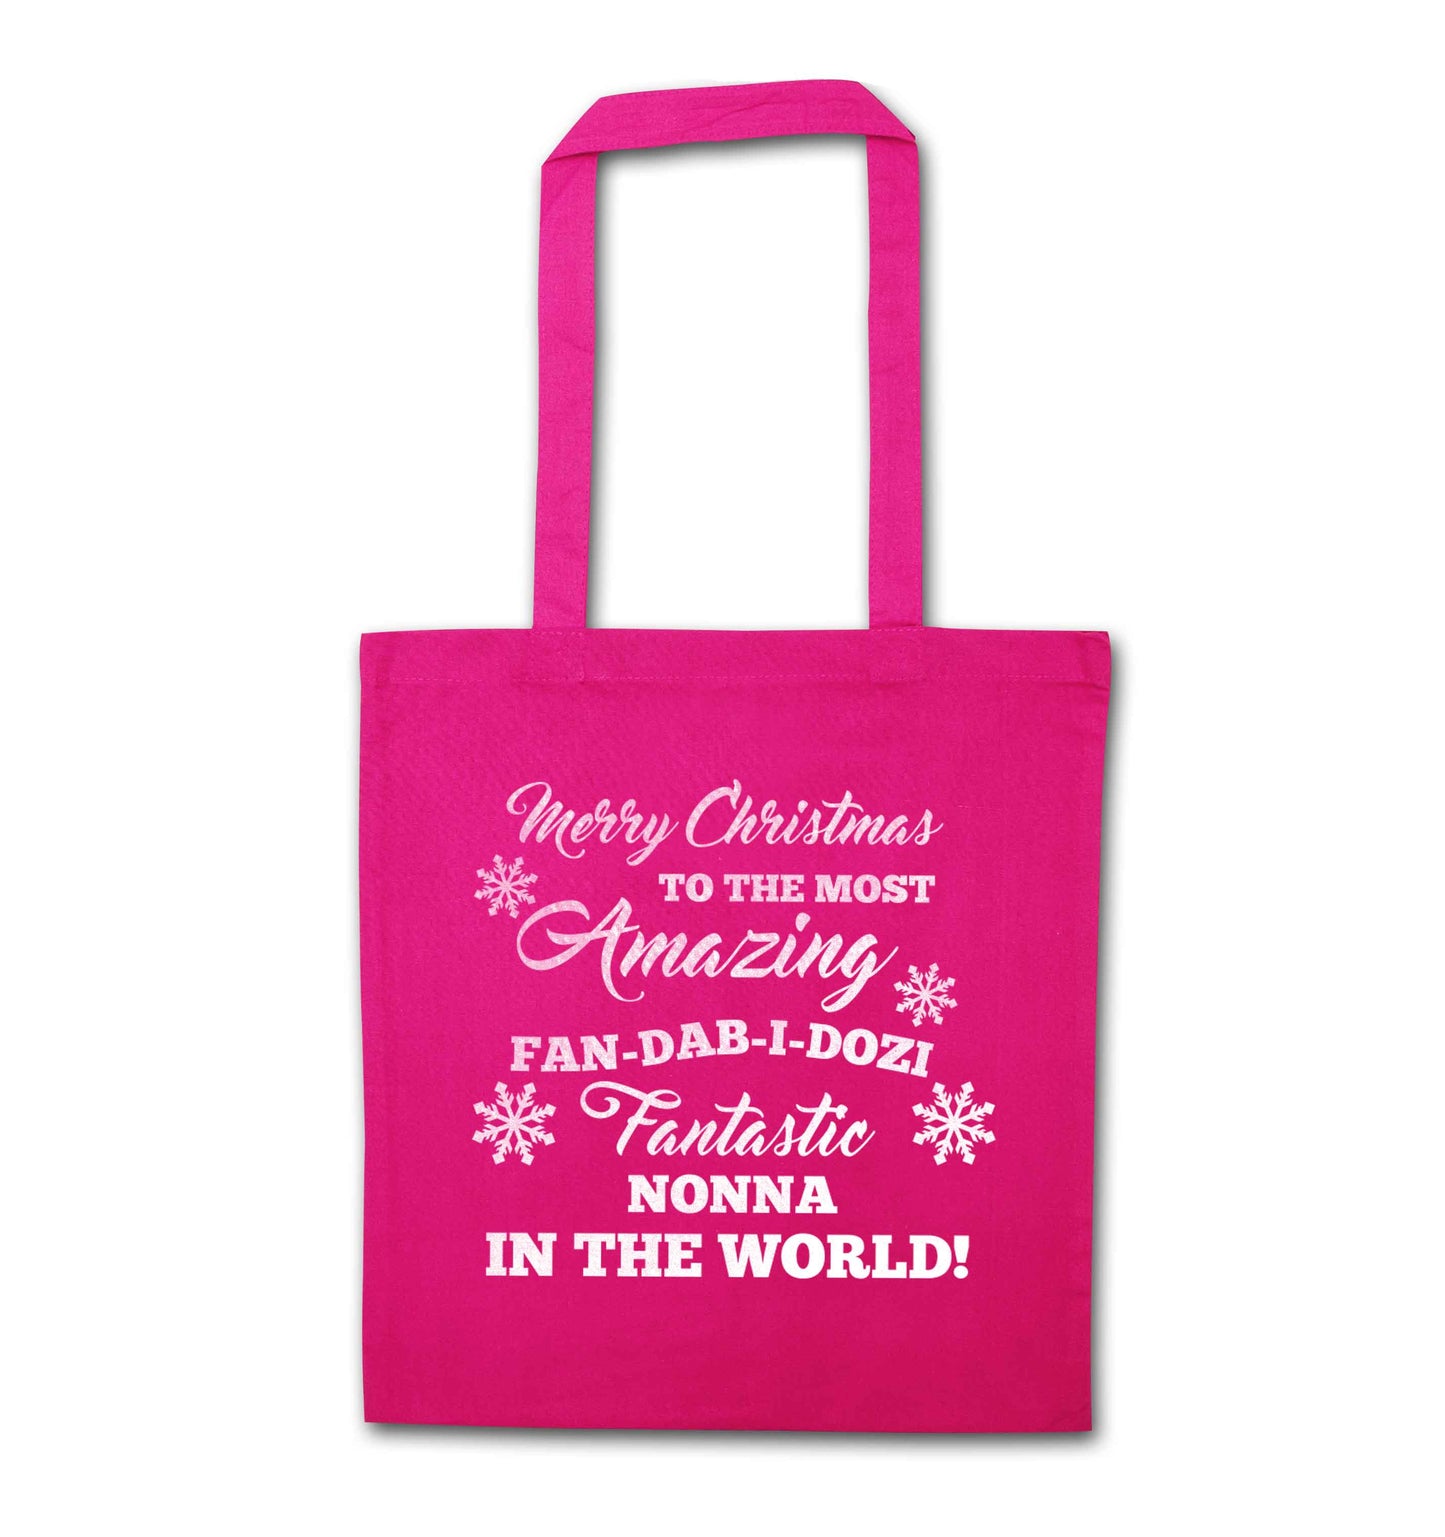 Merry Christmas to the most amazing fan-dab-i-dozi fantasic Nonna in the world pink tote bag